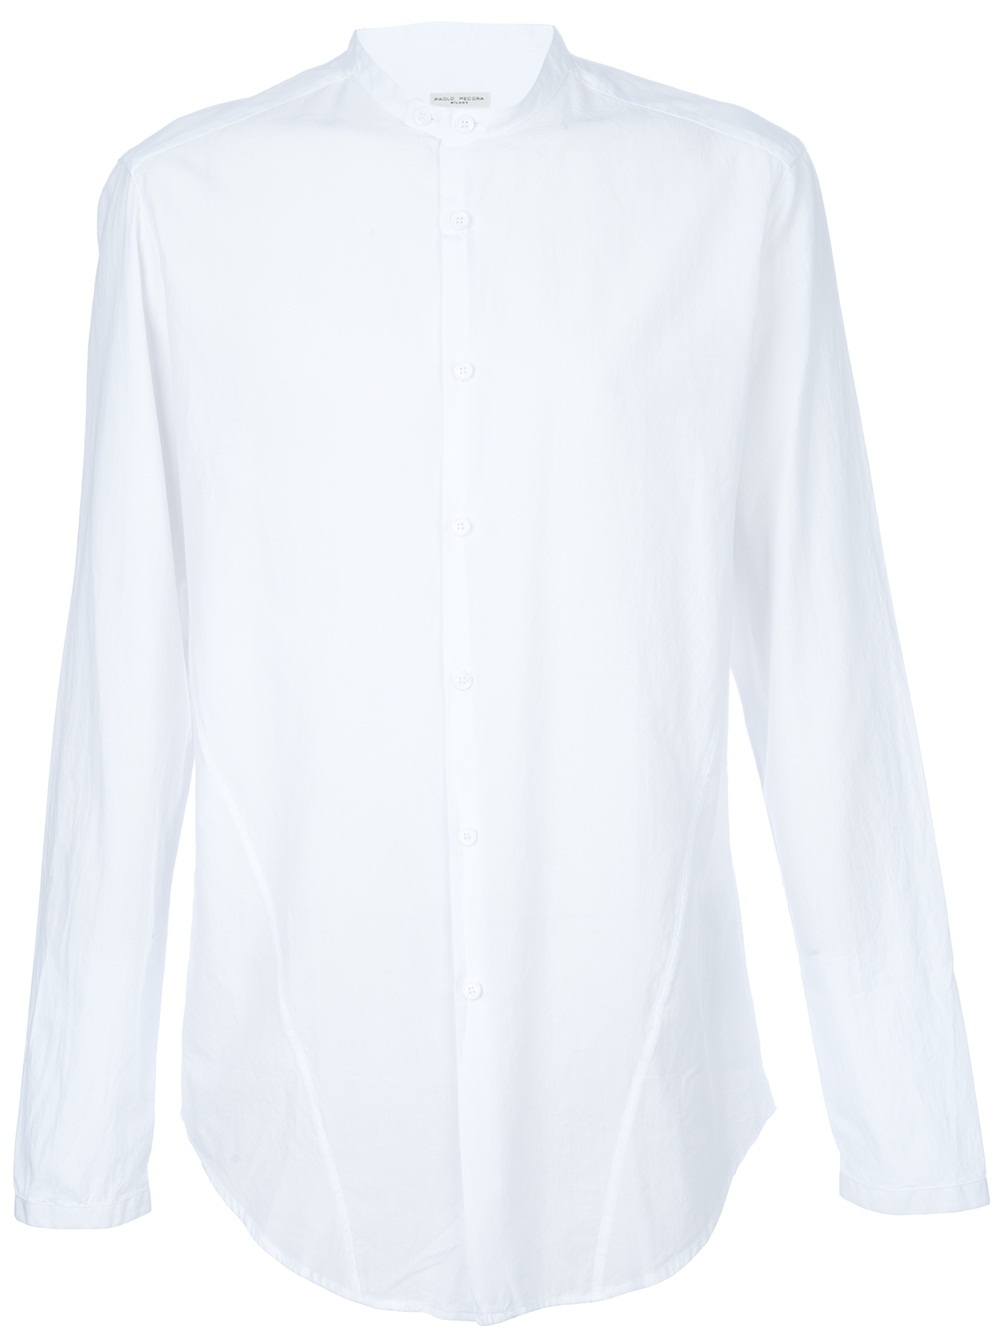 Paolo Pecora Banded Collar Shirt in White for Men - Lyst